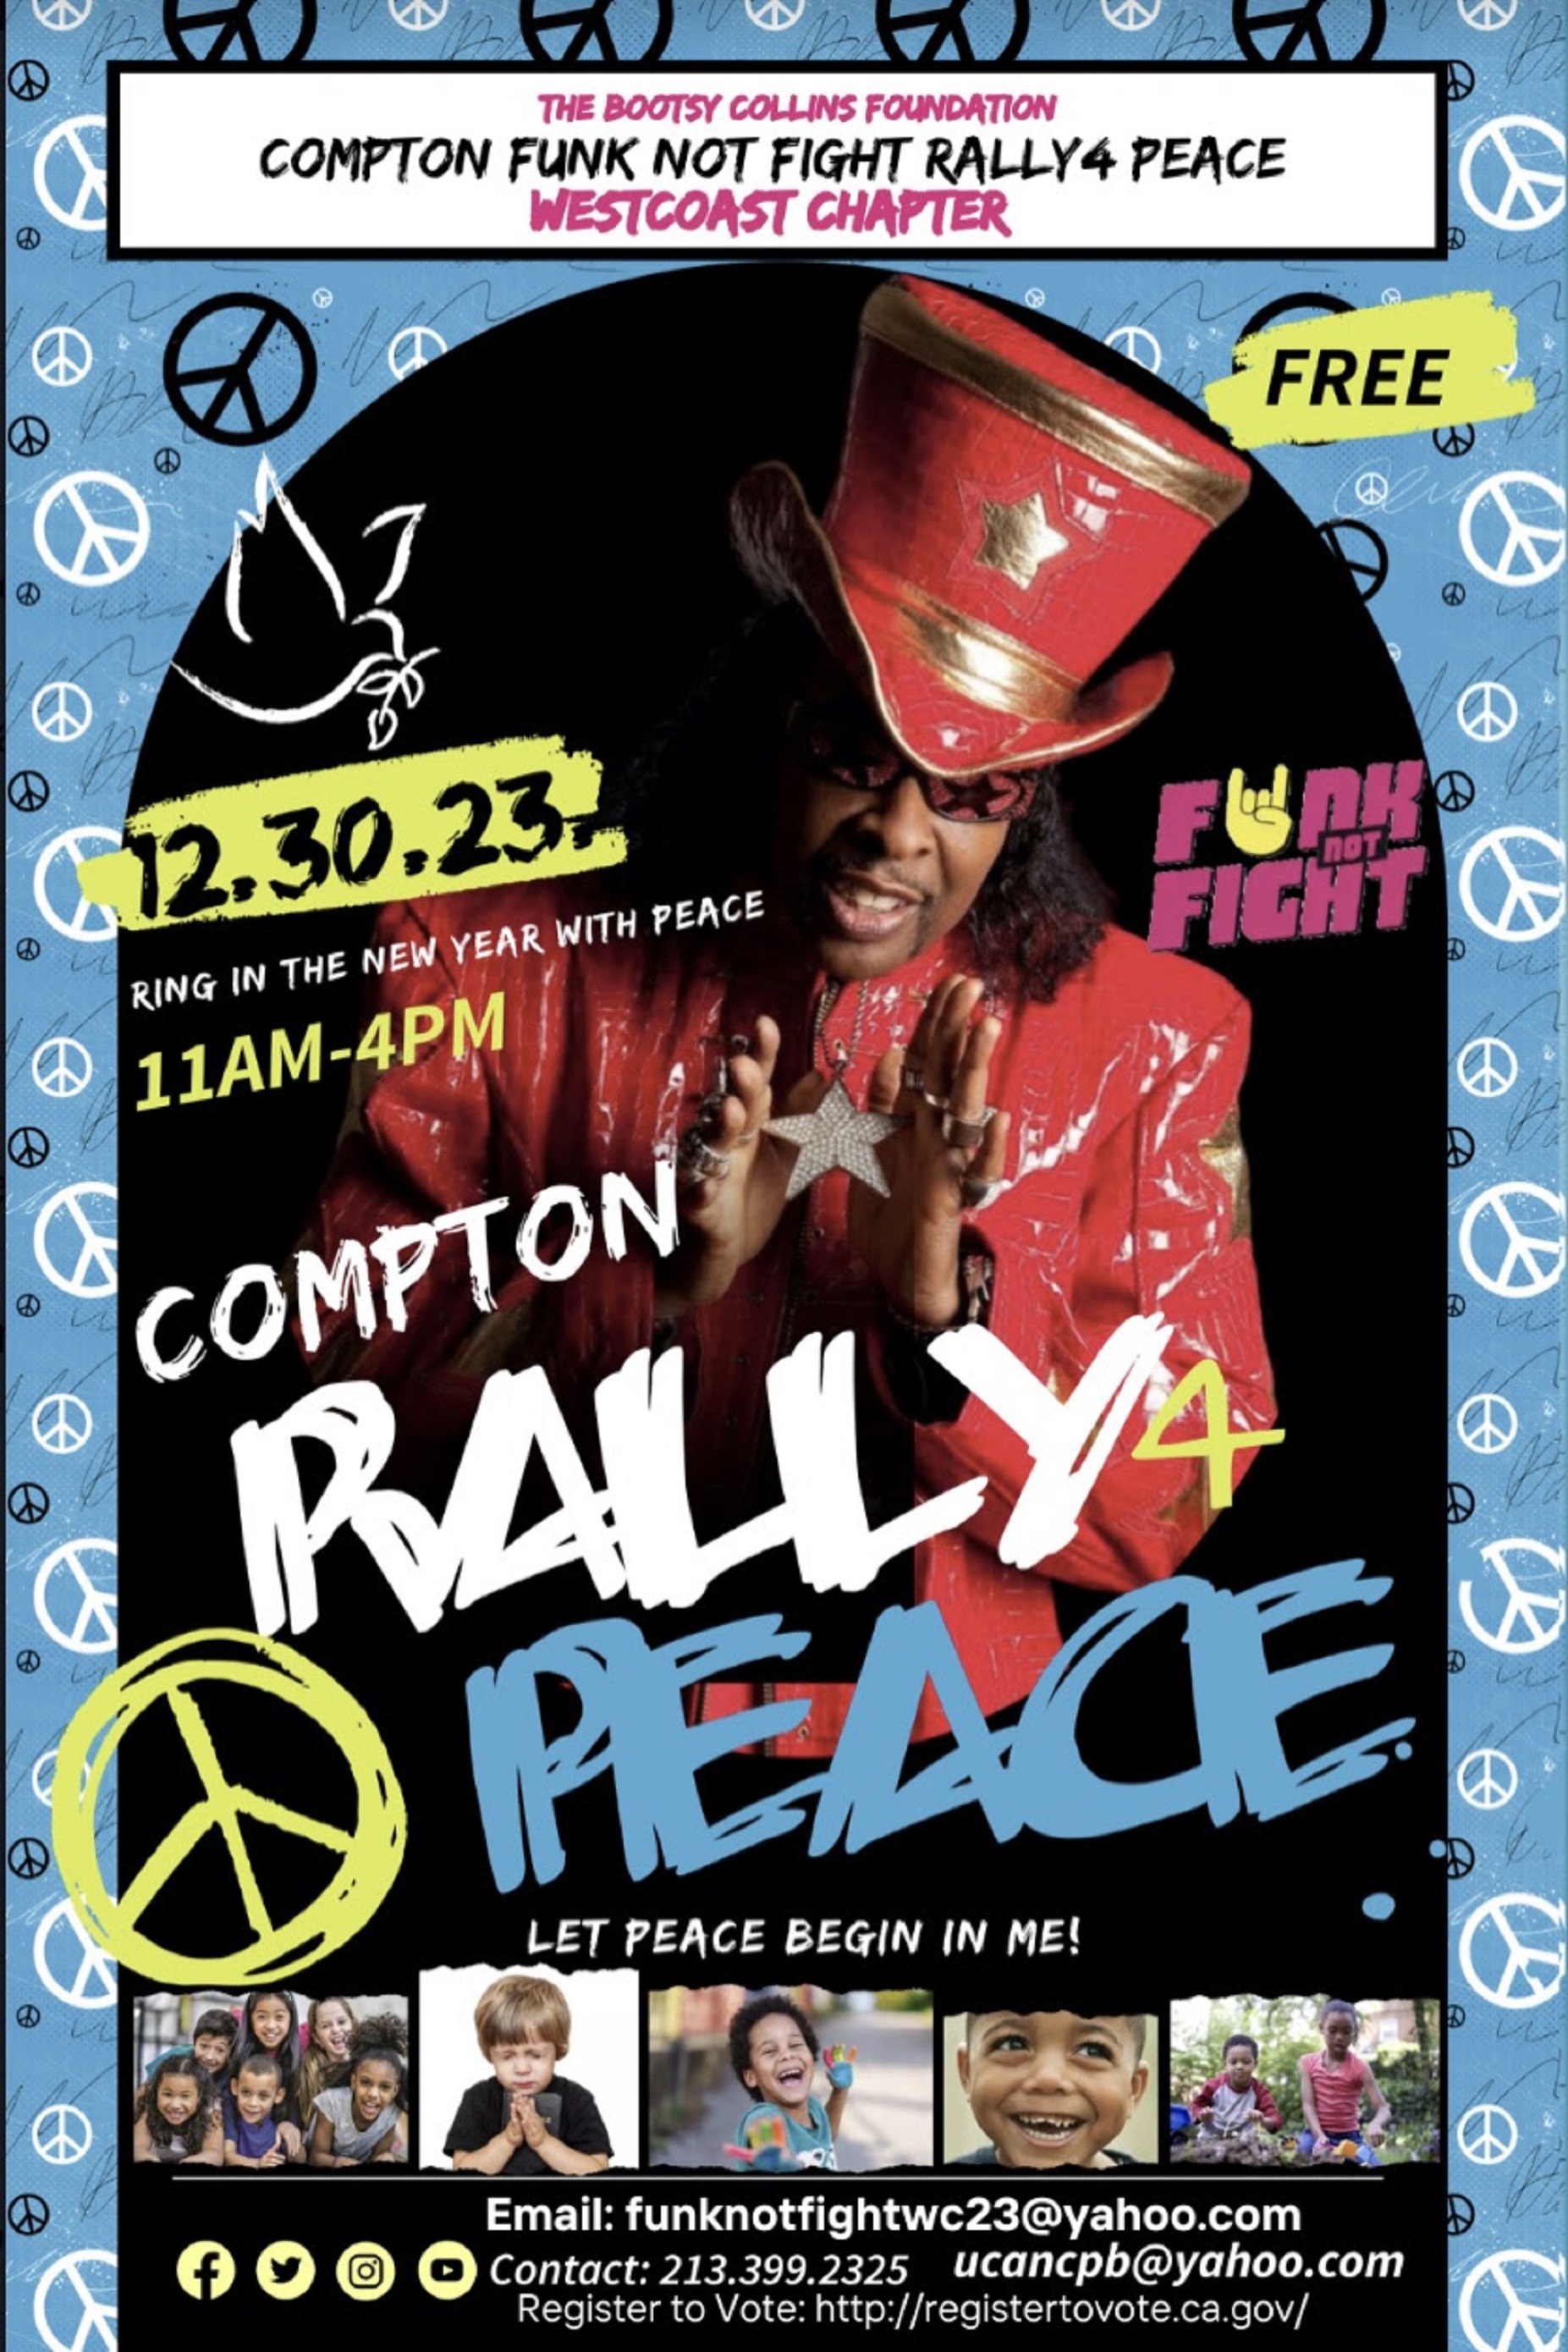 Bootsy Collins releases two new songs: new theme song for Cincinnati Black Music Walk of Fame + "We Outta Be Funkin" for Funk Not Fight Rally4 Peace